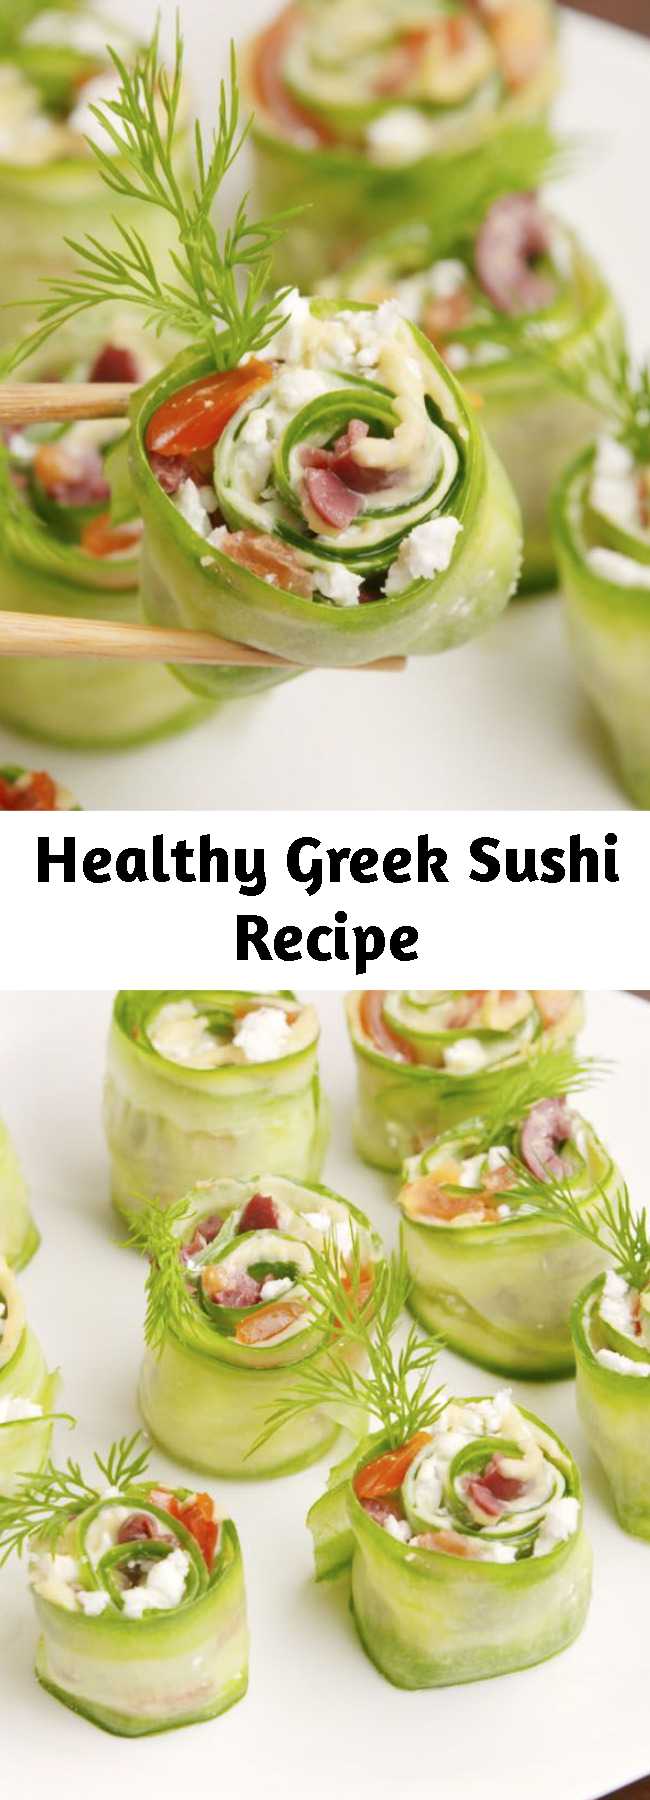 Healthy Greek Sushi Recipe - Get your chopsticks ready! #food #healthyeating #cleaneating #gf #glutenfree